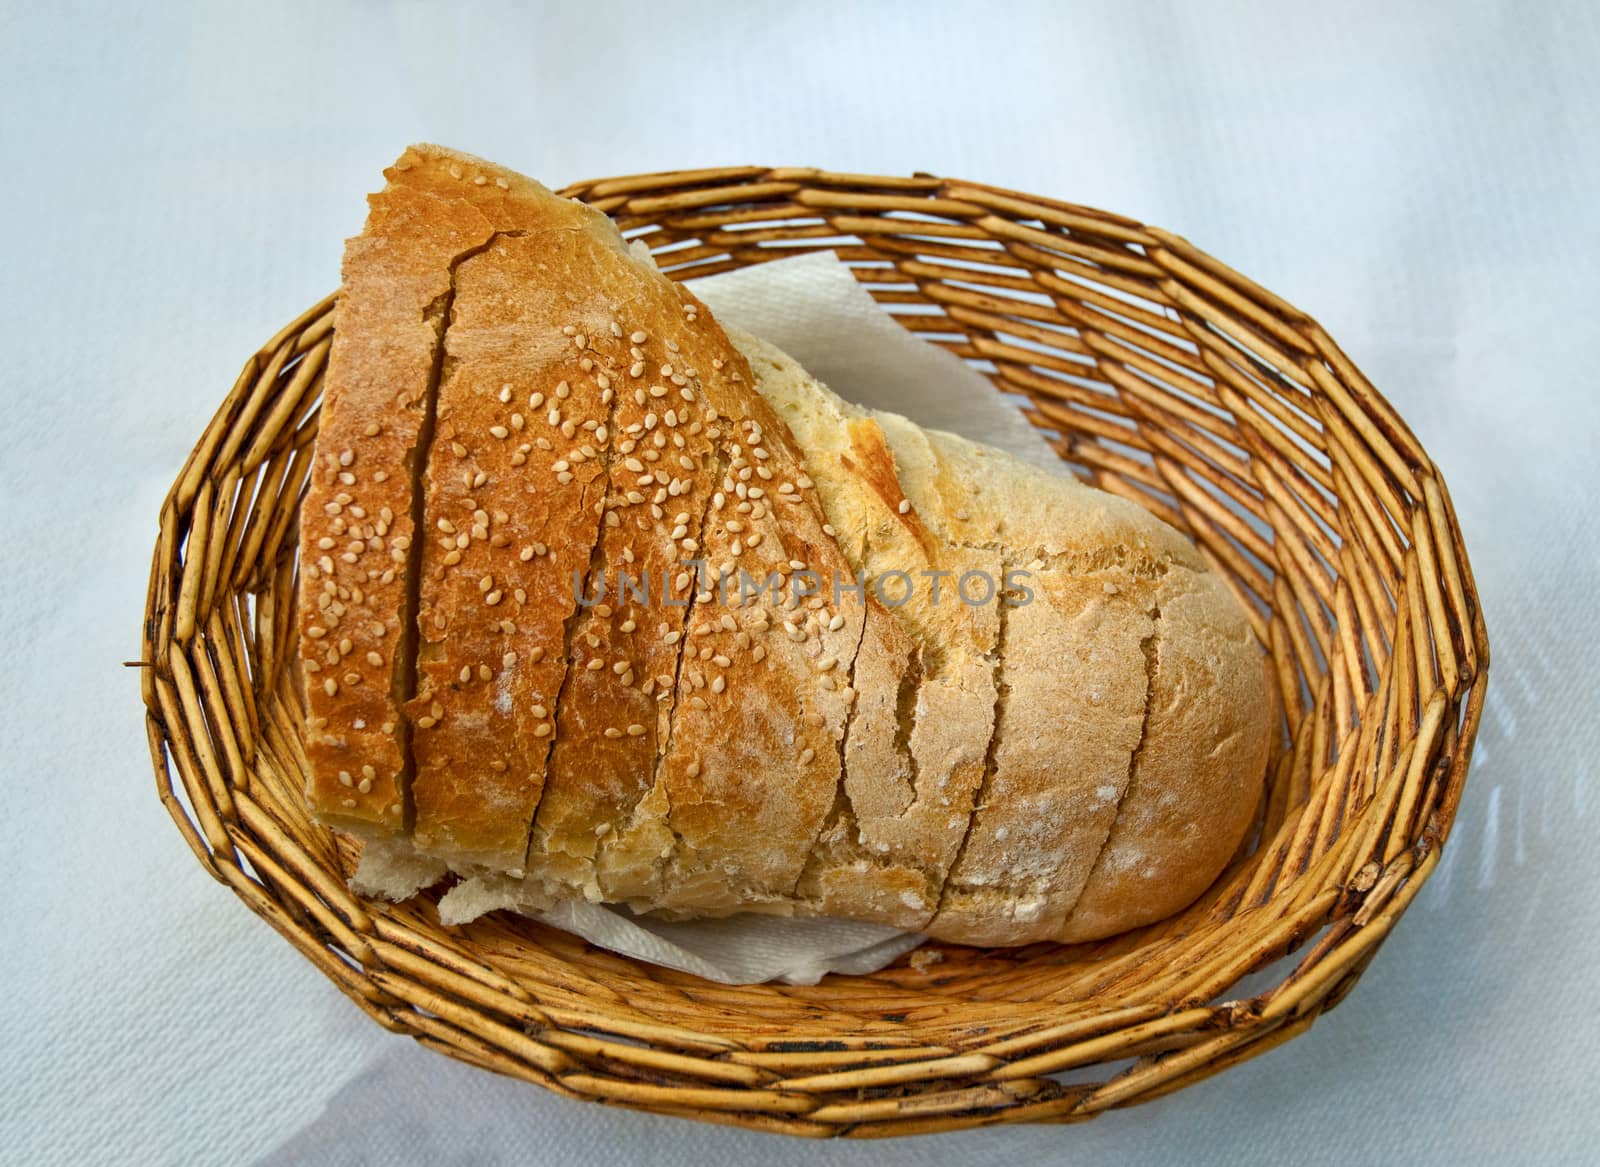 Bread in a basket. by LarisaP